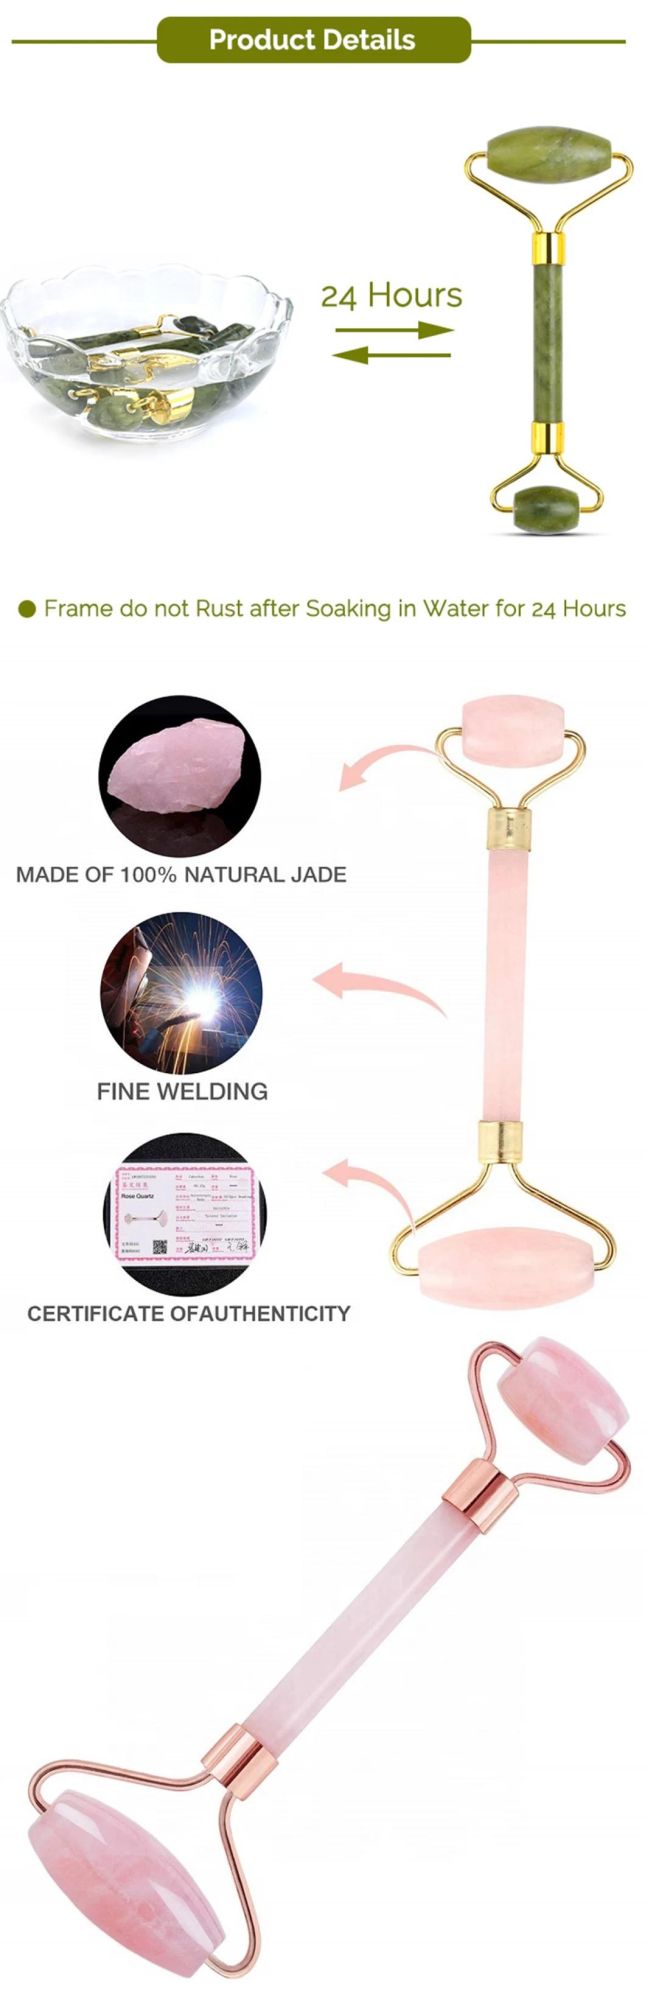 Hot Selling Rose Quartz Roller Cheap Private Label Pink Face Roller Crystal Pink Jade Roller Set with Acrylic for Anti Aging